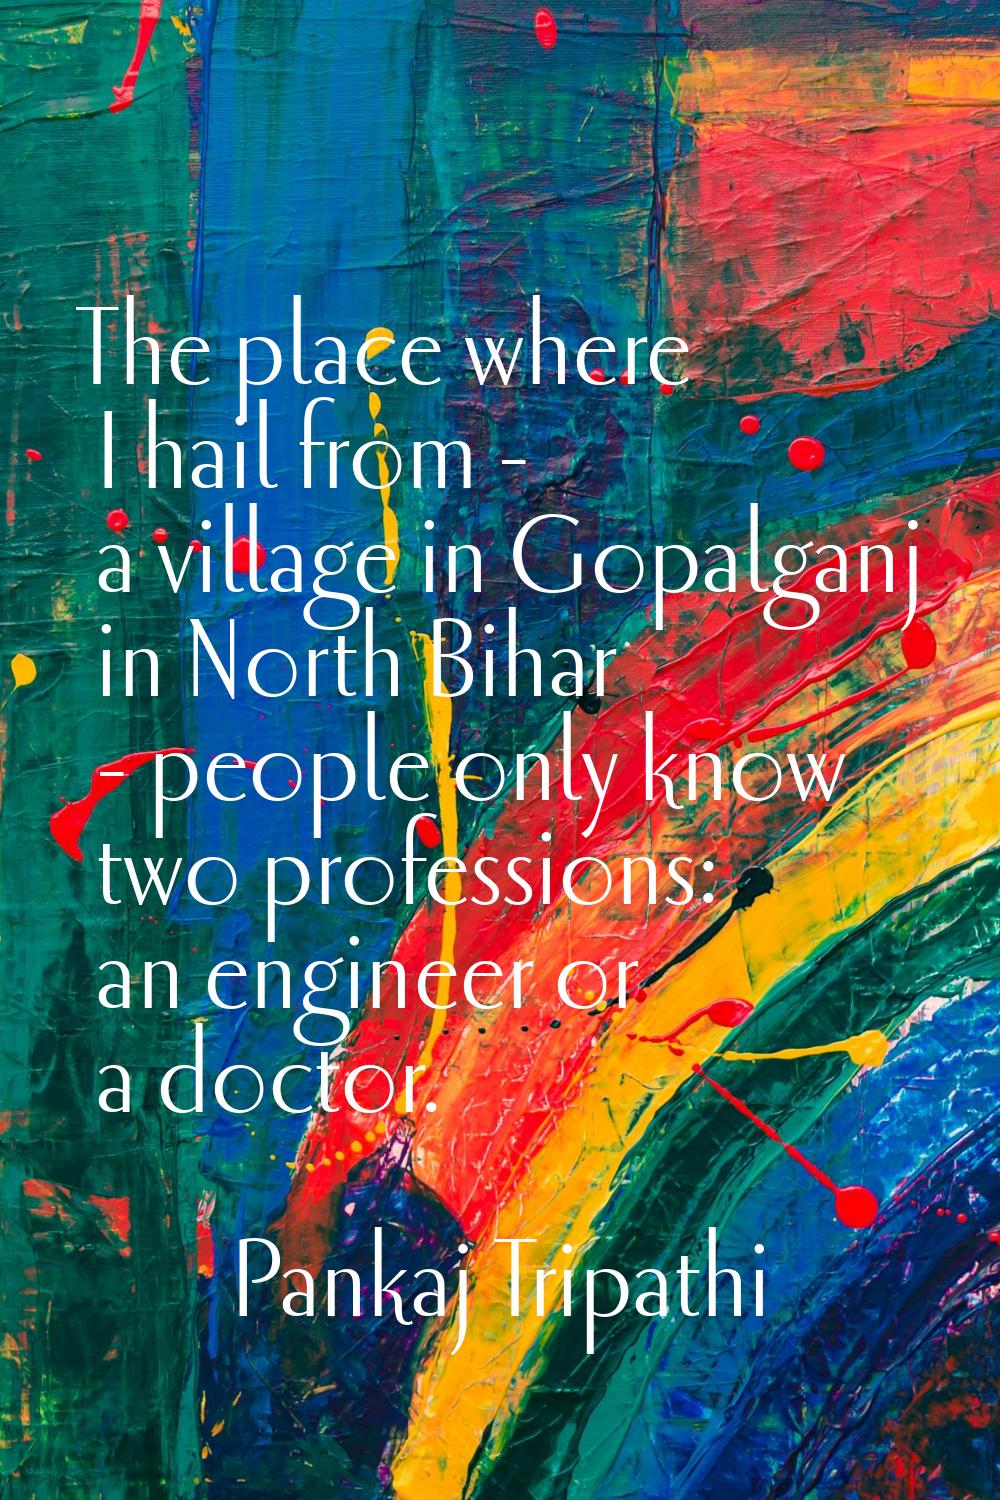 The place where I hail from - a village in Gopalganj in North Bihar - people only know two professi